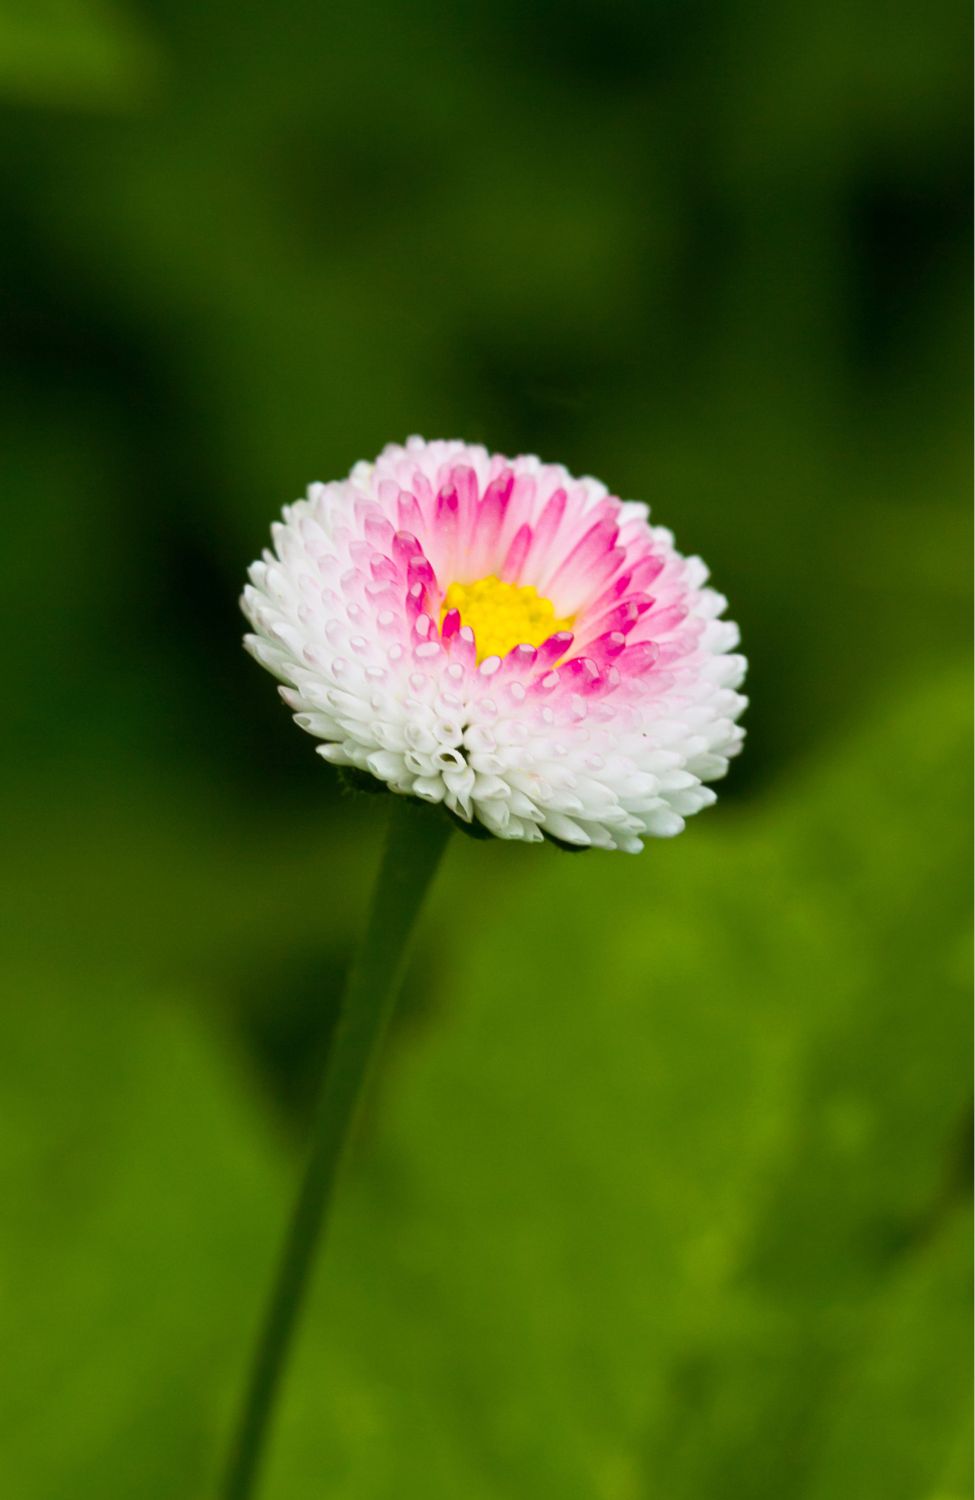 Big Pink English Daisy Seeds - Grow large and captivating pink daisies in your garden